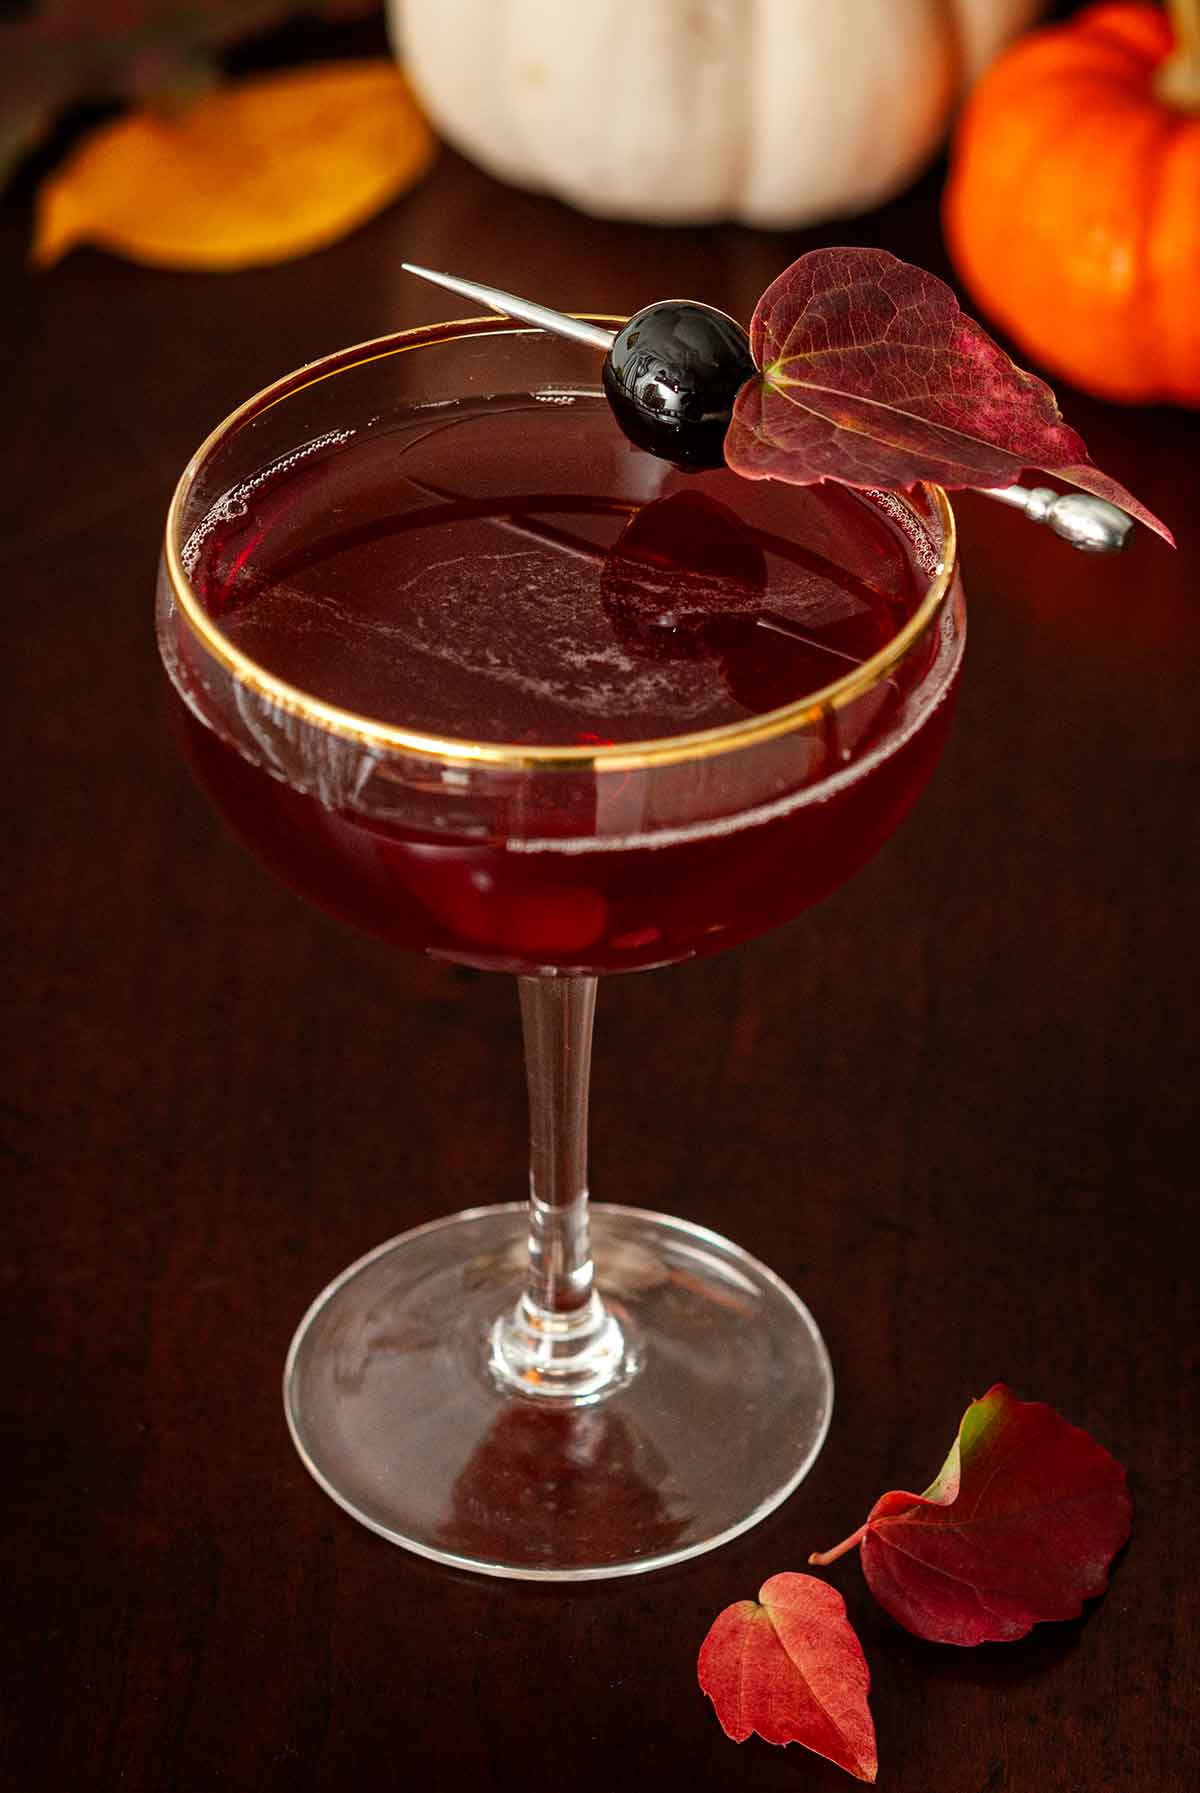 A red cocktail on a wooden table, garnished with a cherry and leaf, in front of pumpkins.